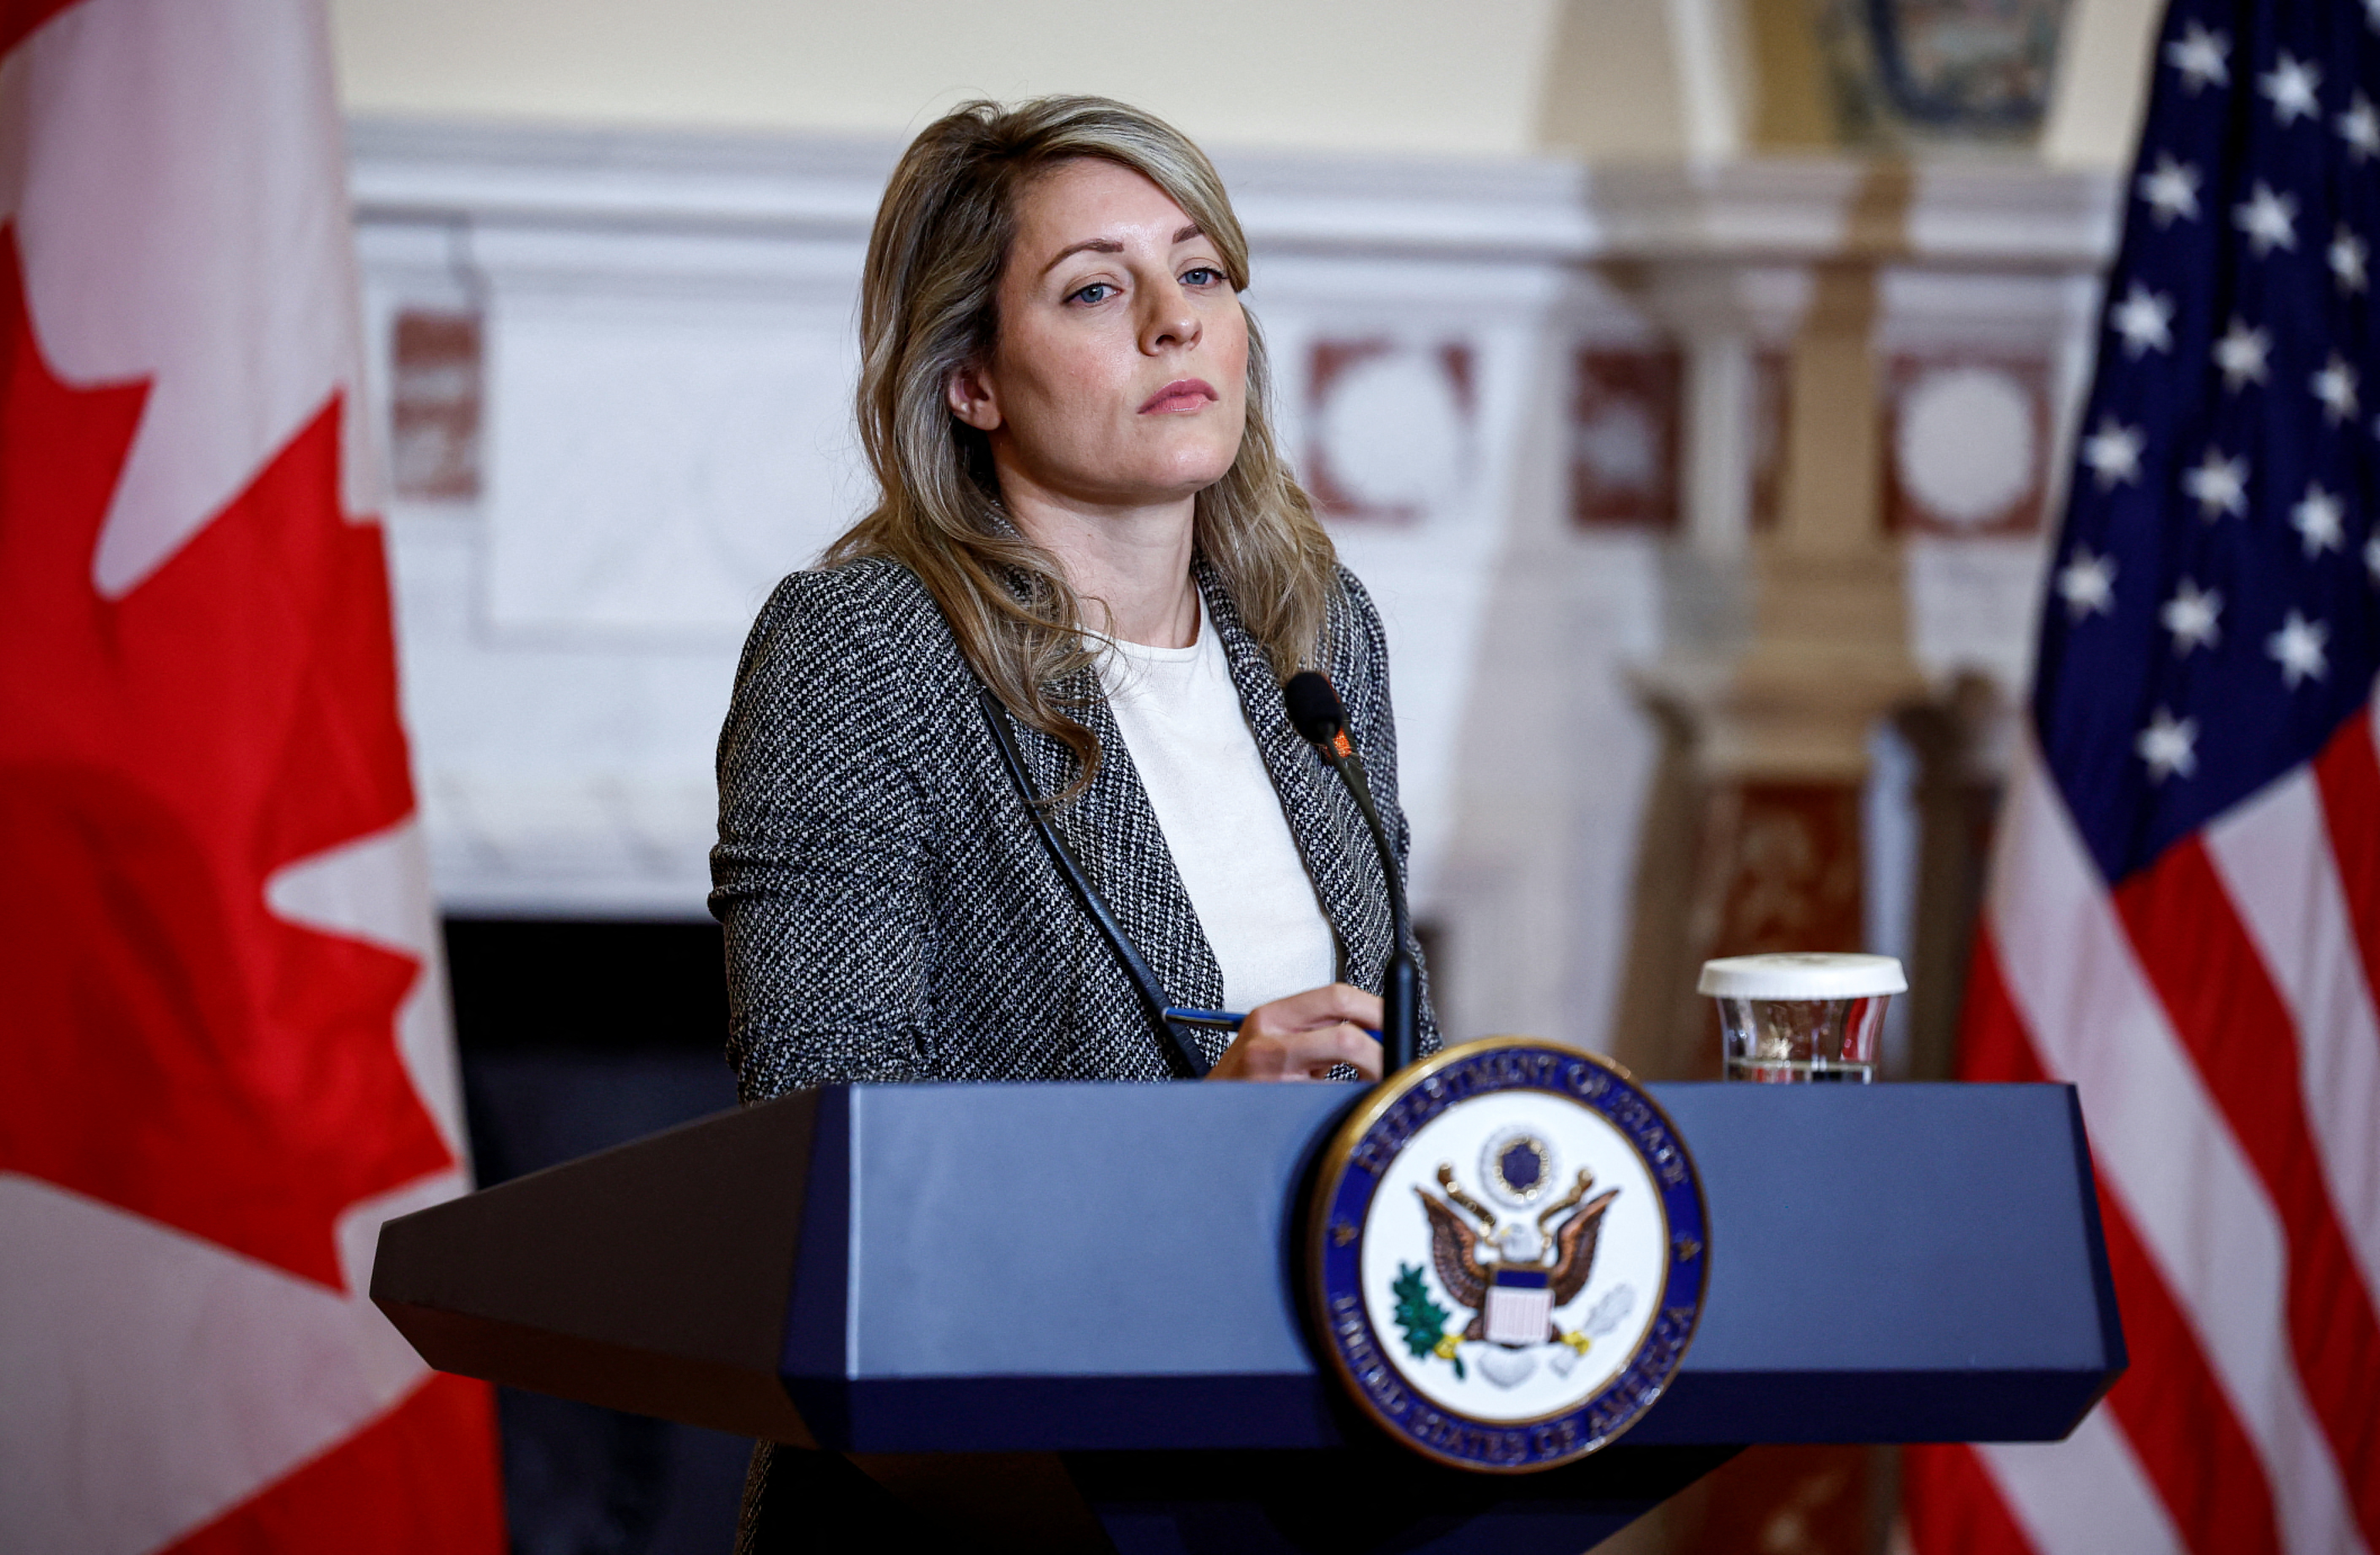 U.S. Secretary of State Antony Blinken holds a joint news conference with Canadian Foreign Minister Melanie Joly in Washington